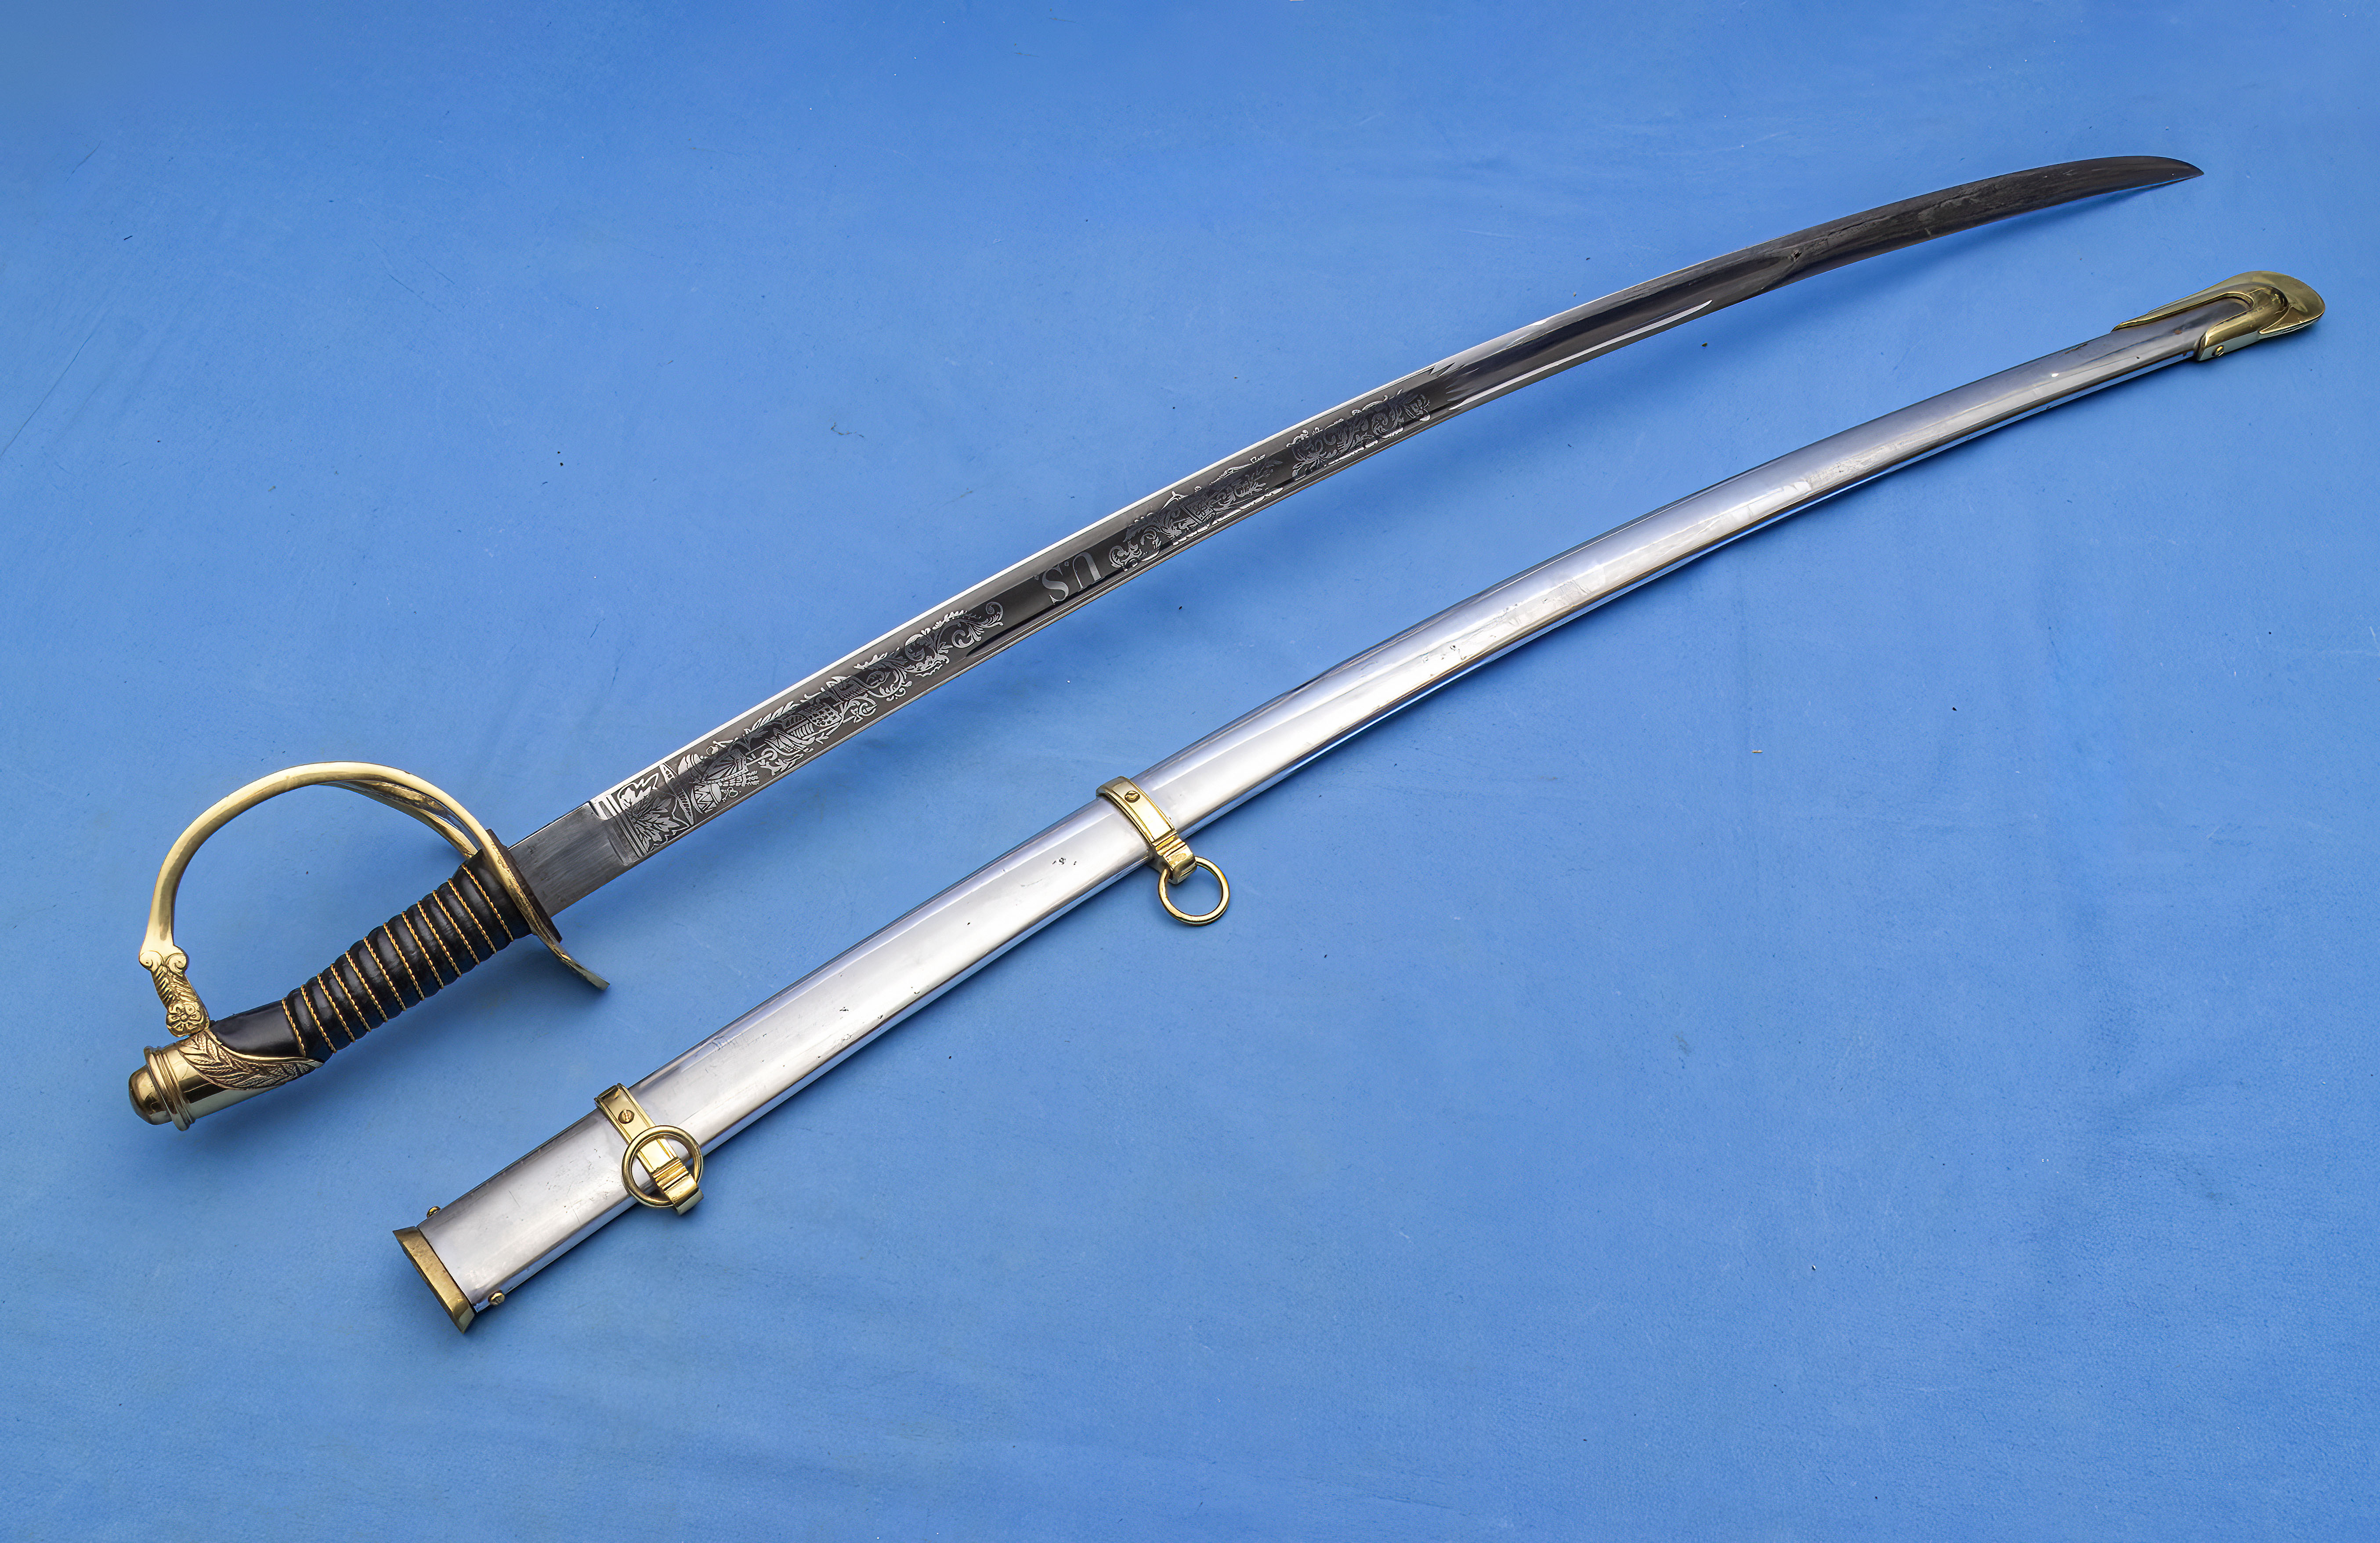 Replica American 1860 cavalry officers sabre - Image 2 of 5